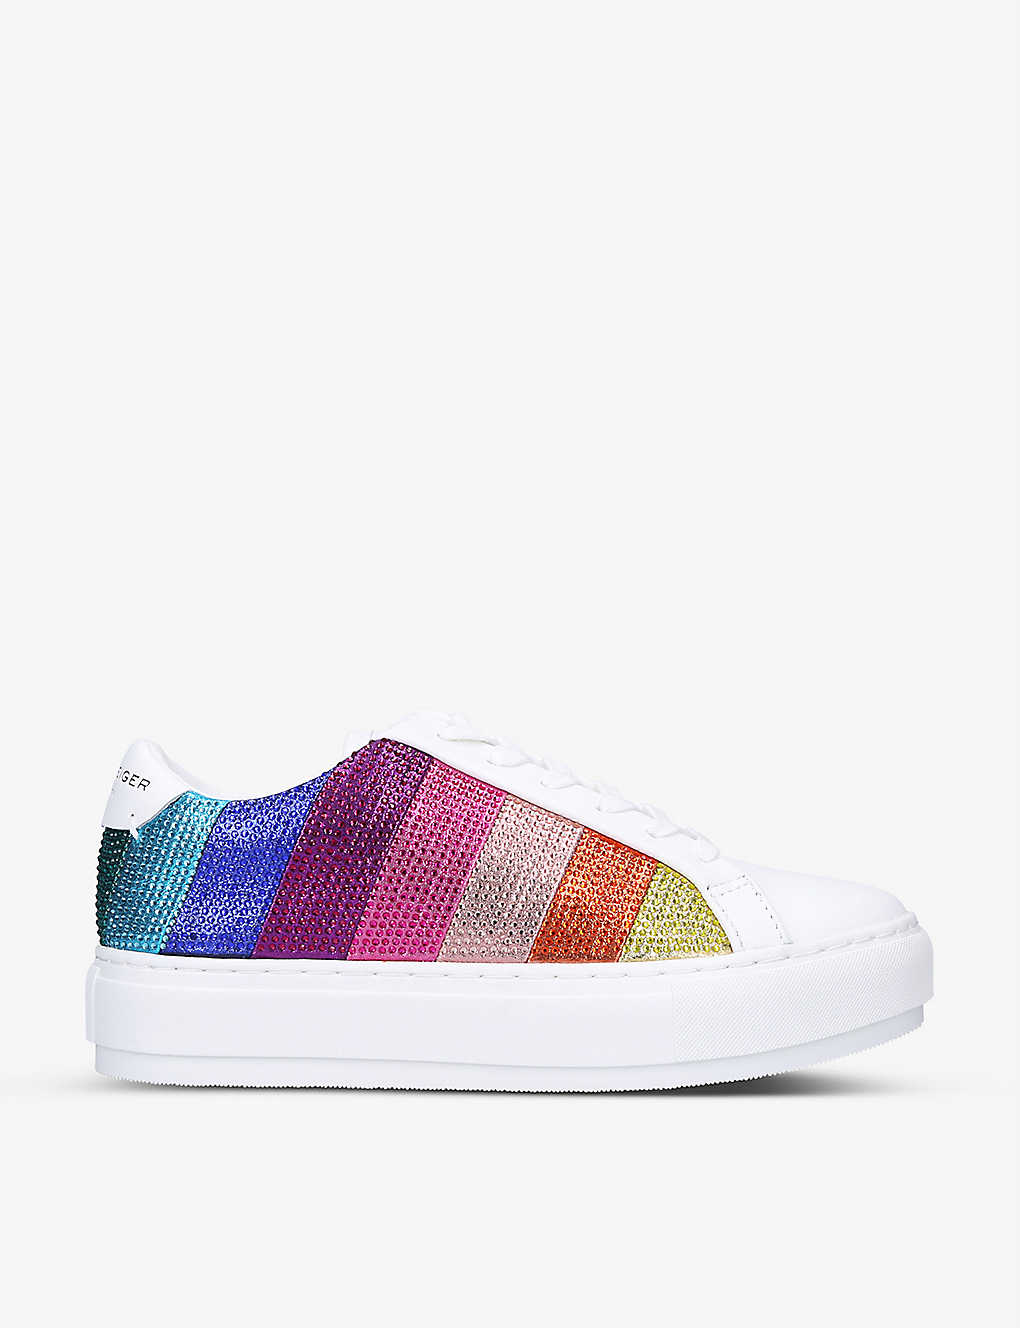 Shop Kurt Geiger London Women's Mult/other Laney Crystal-embellished Leather Low-top Trainers